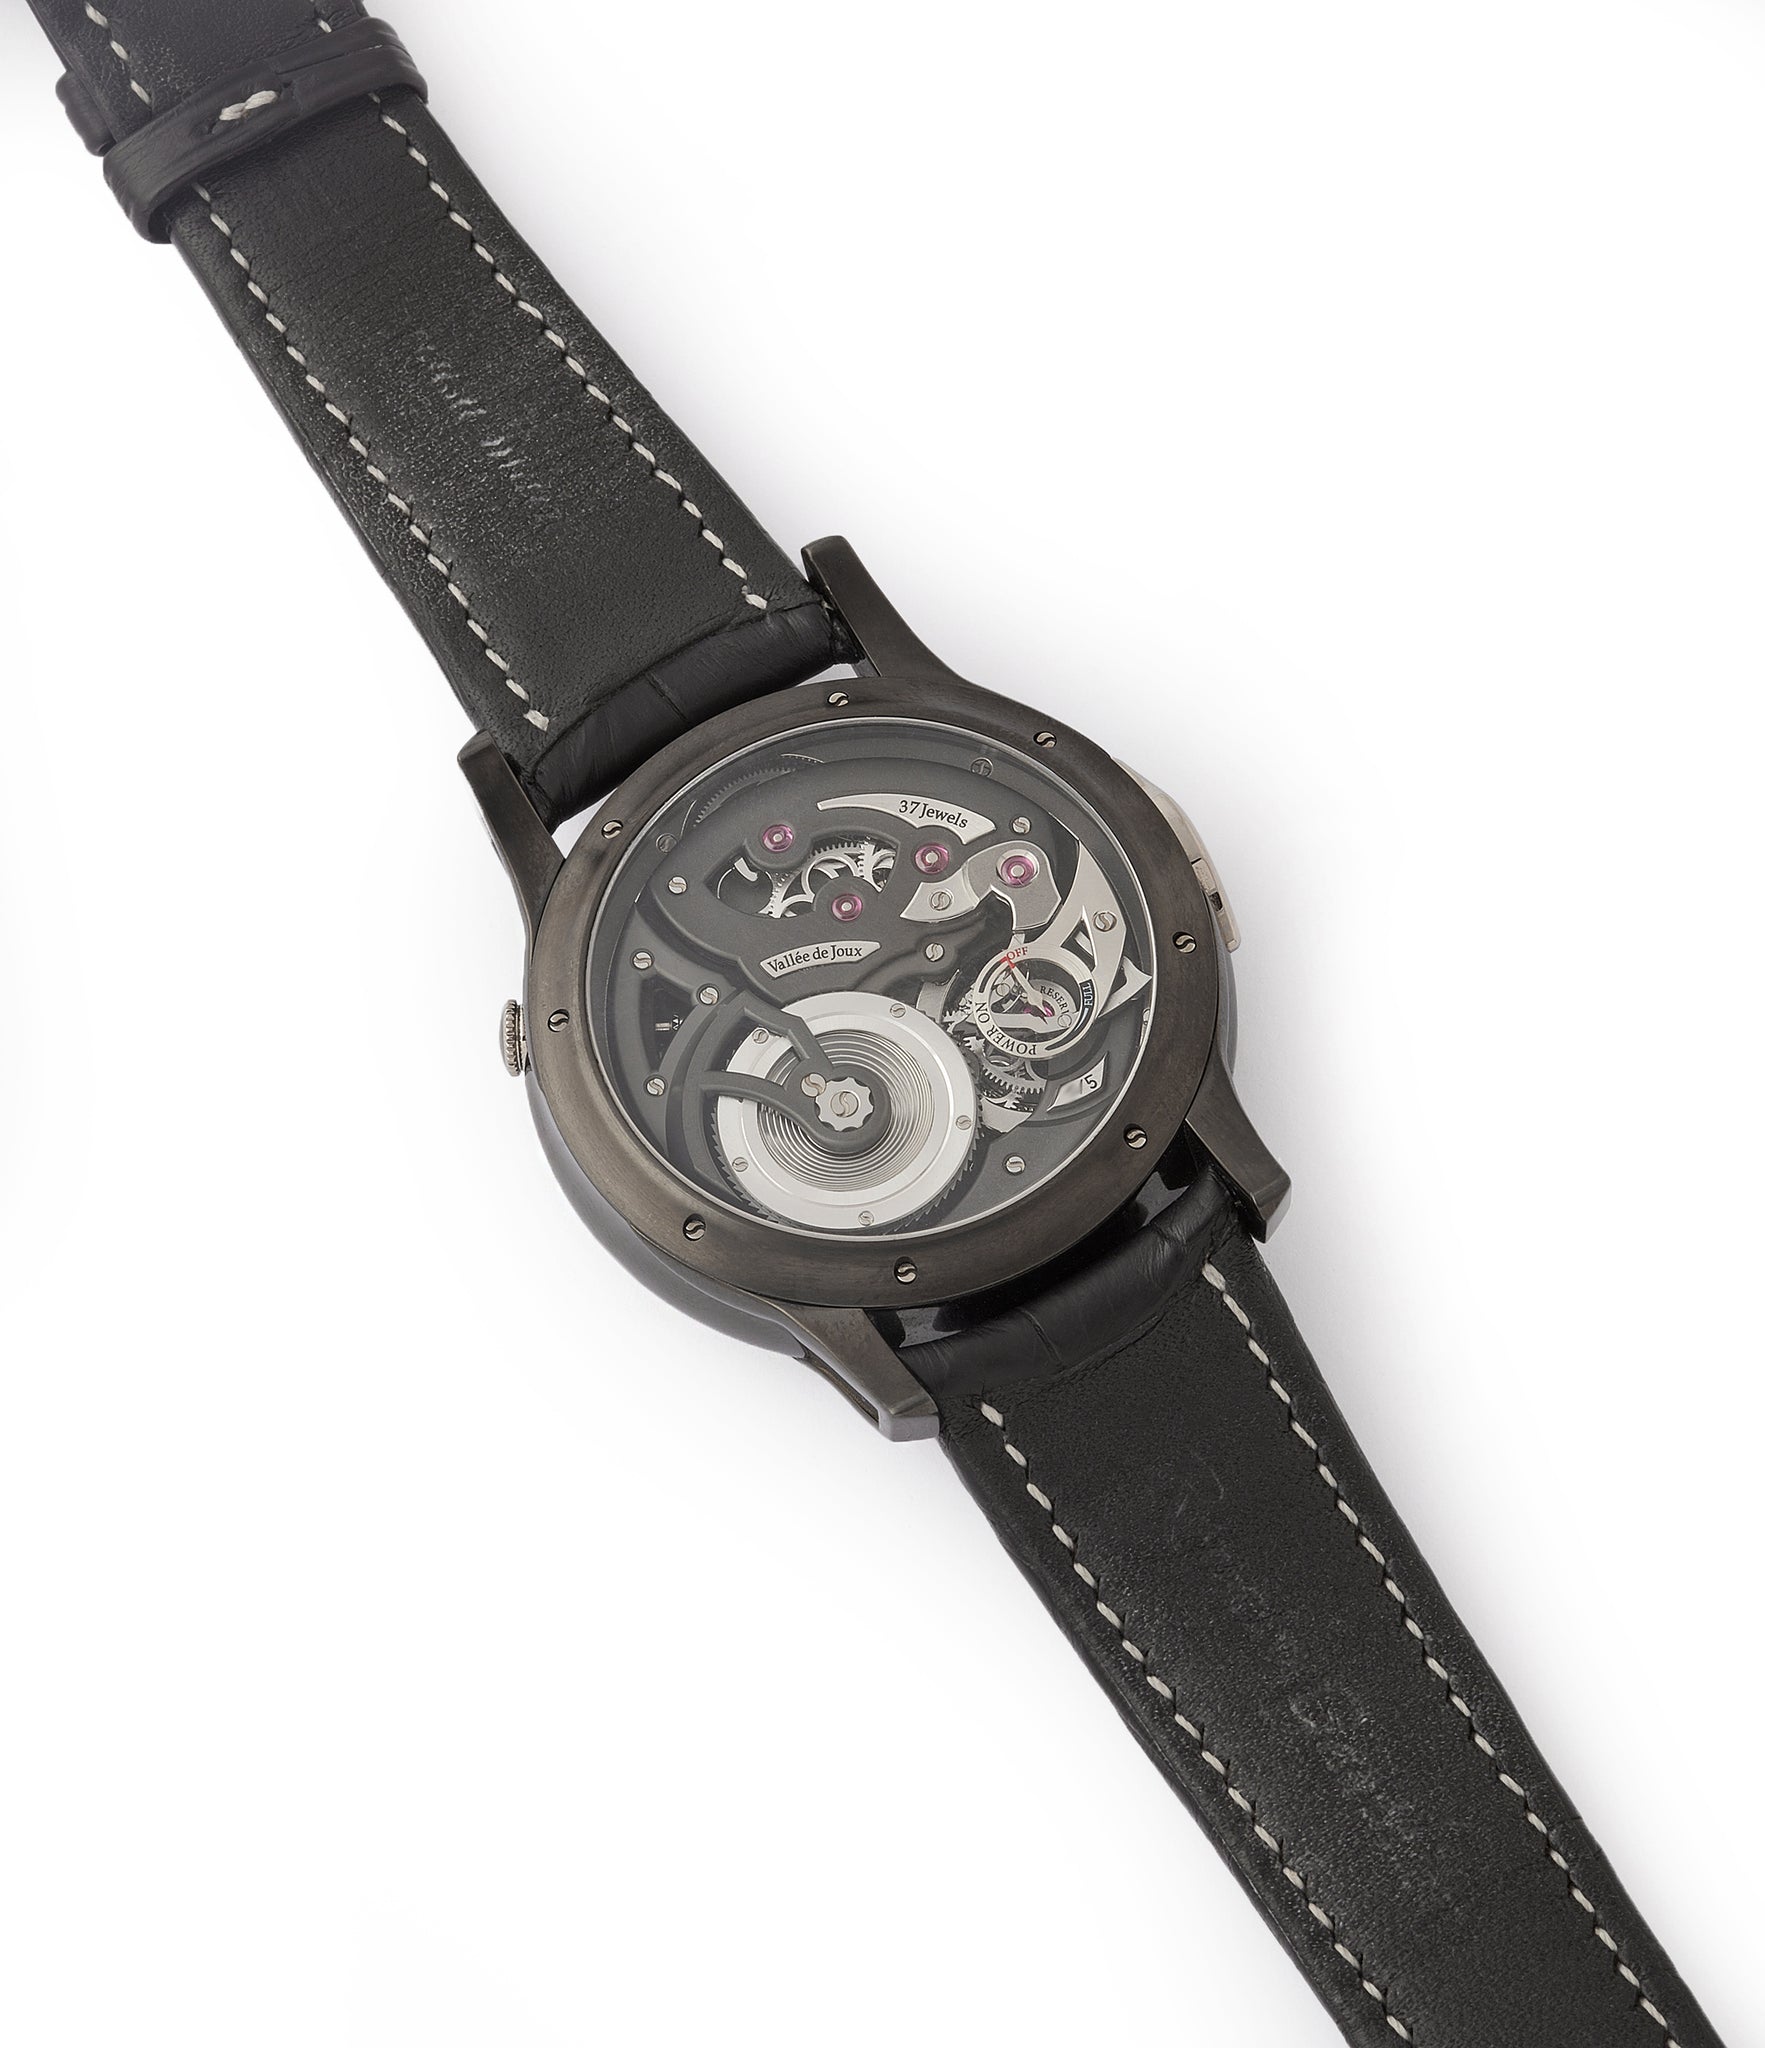 manual-winding hand-made movement Romain Gauthier Limited Edition Logical One BTG titanium watch blue enamel dial for sale online at A Collected Man London UK specialist of independent watchmakers